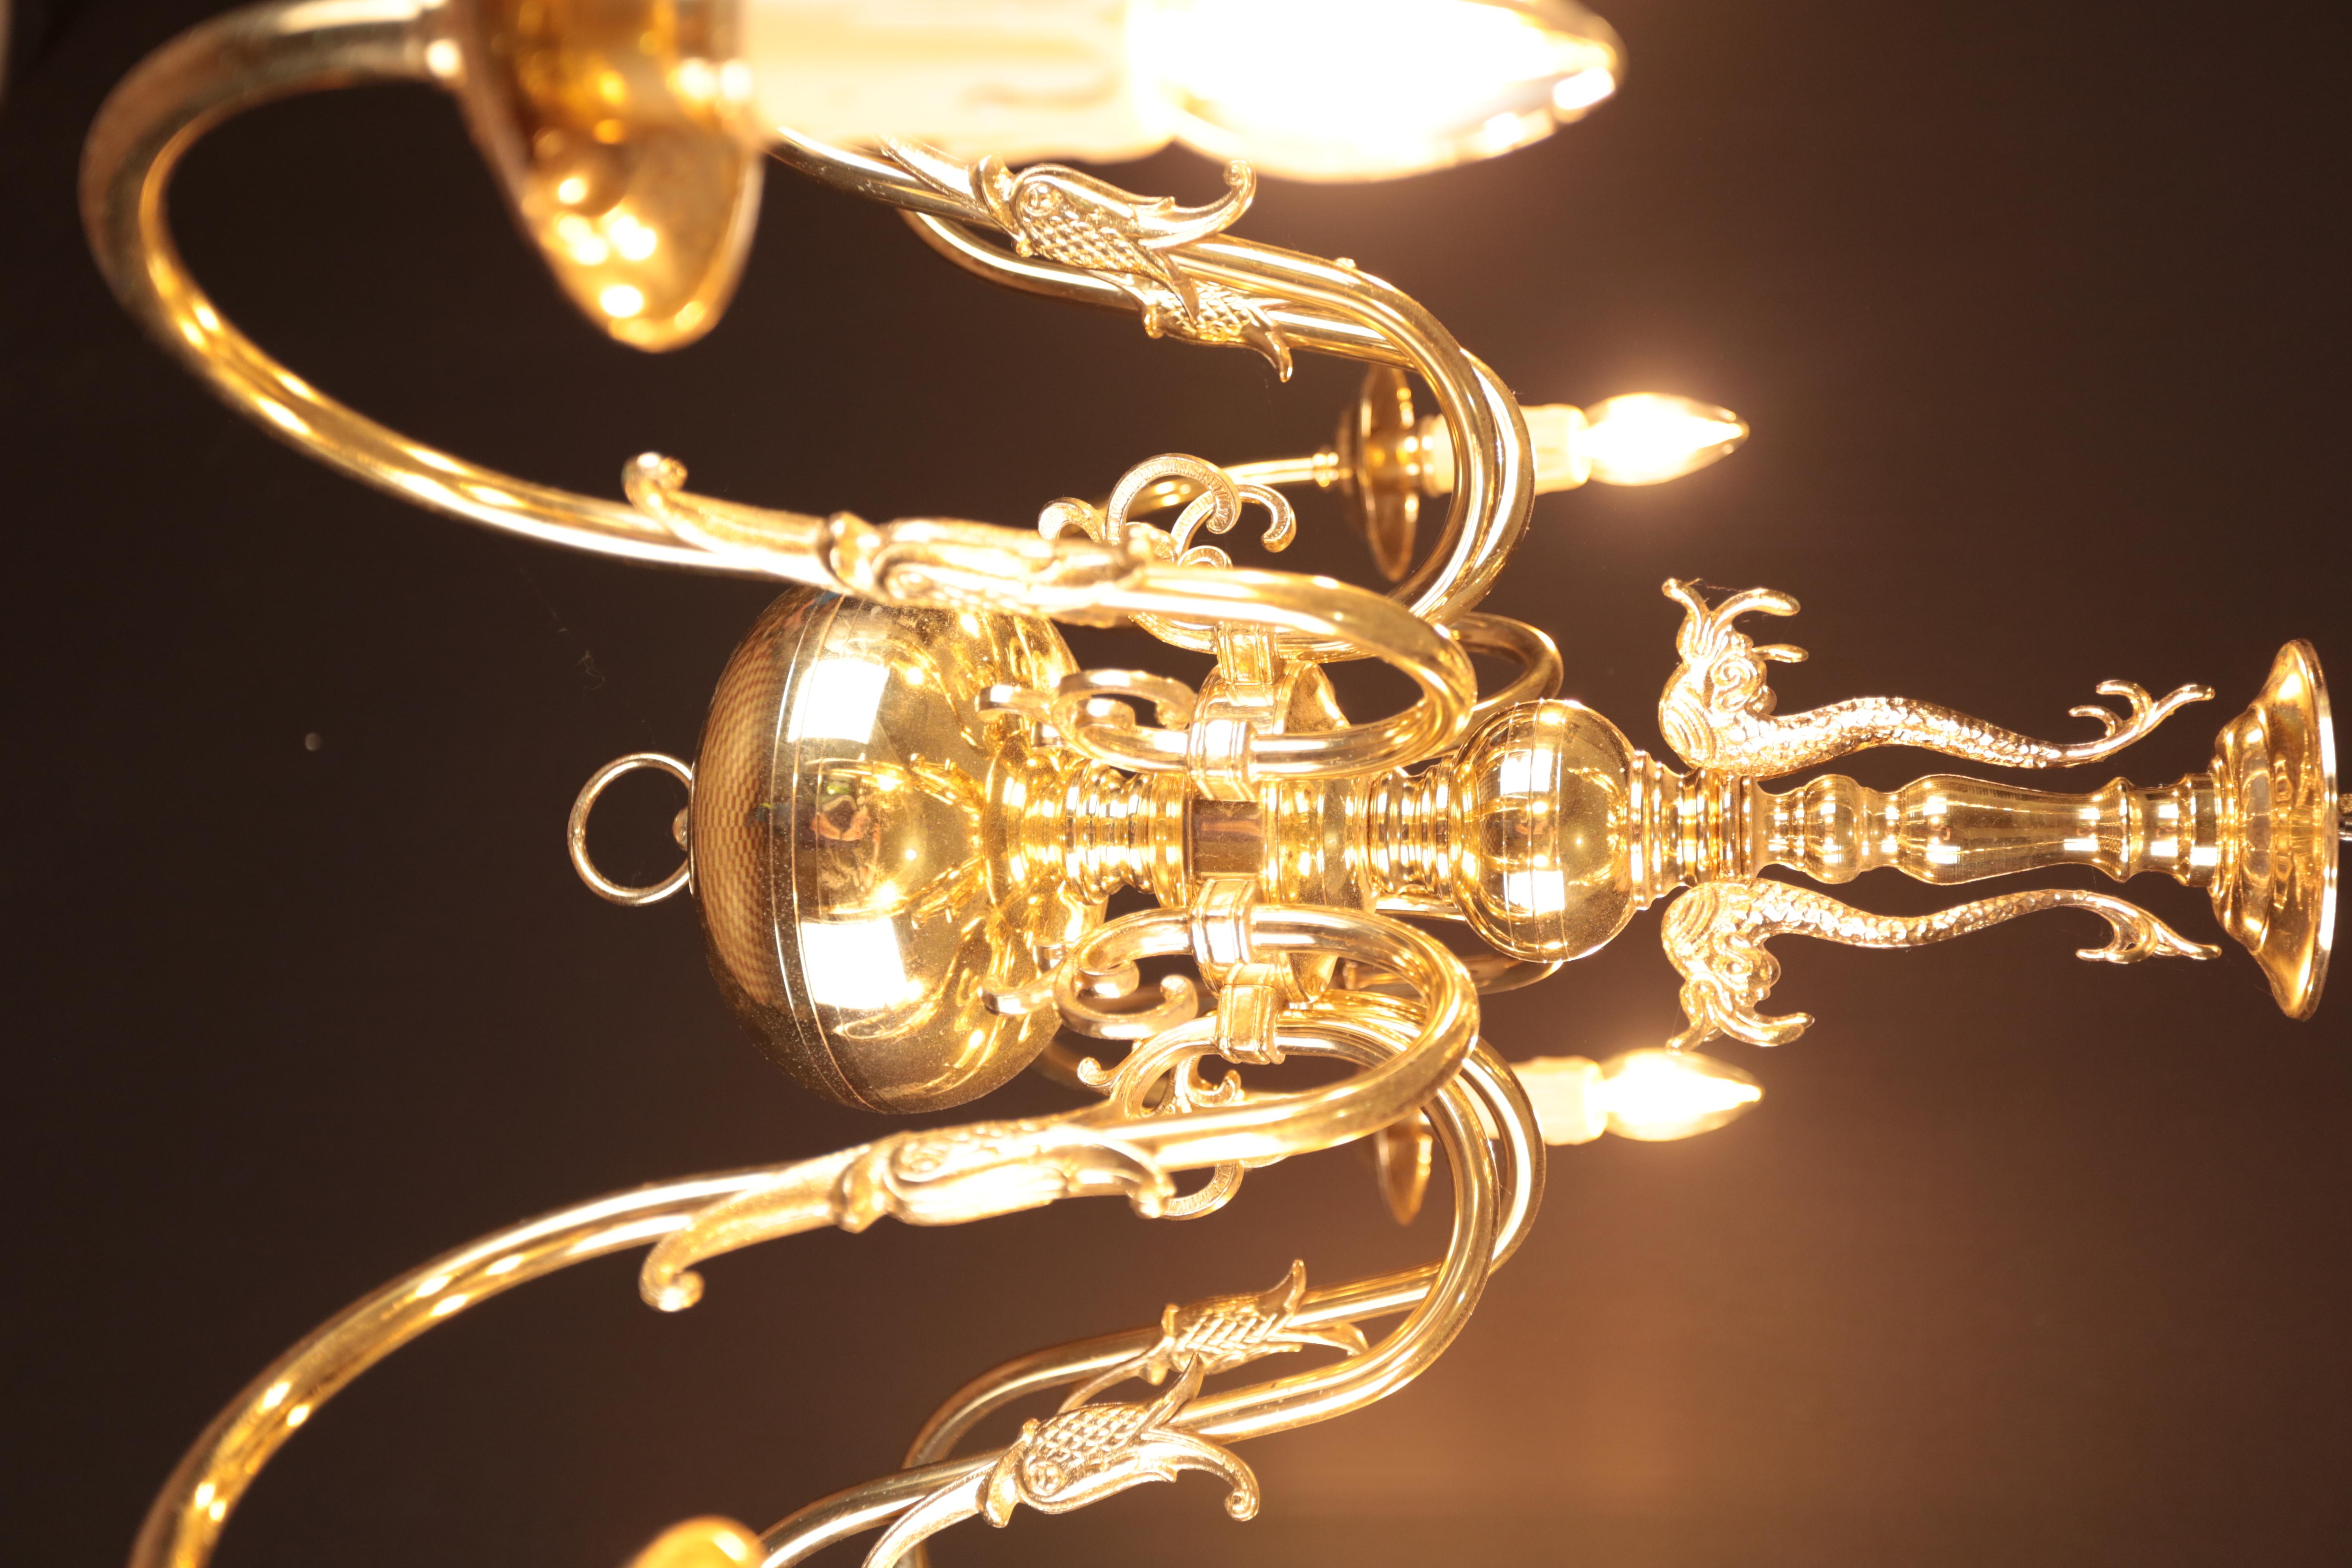 Belgian Eight-armed Flemish chandelier. Functional For Sale